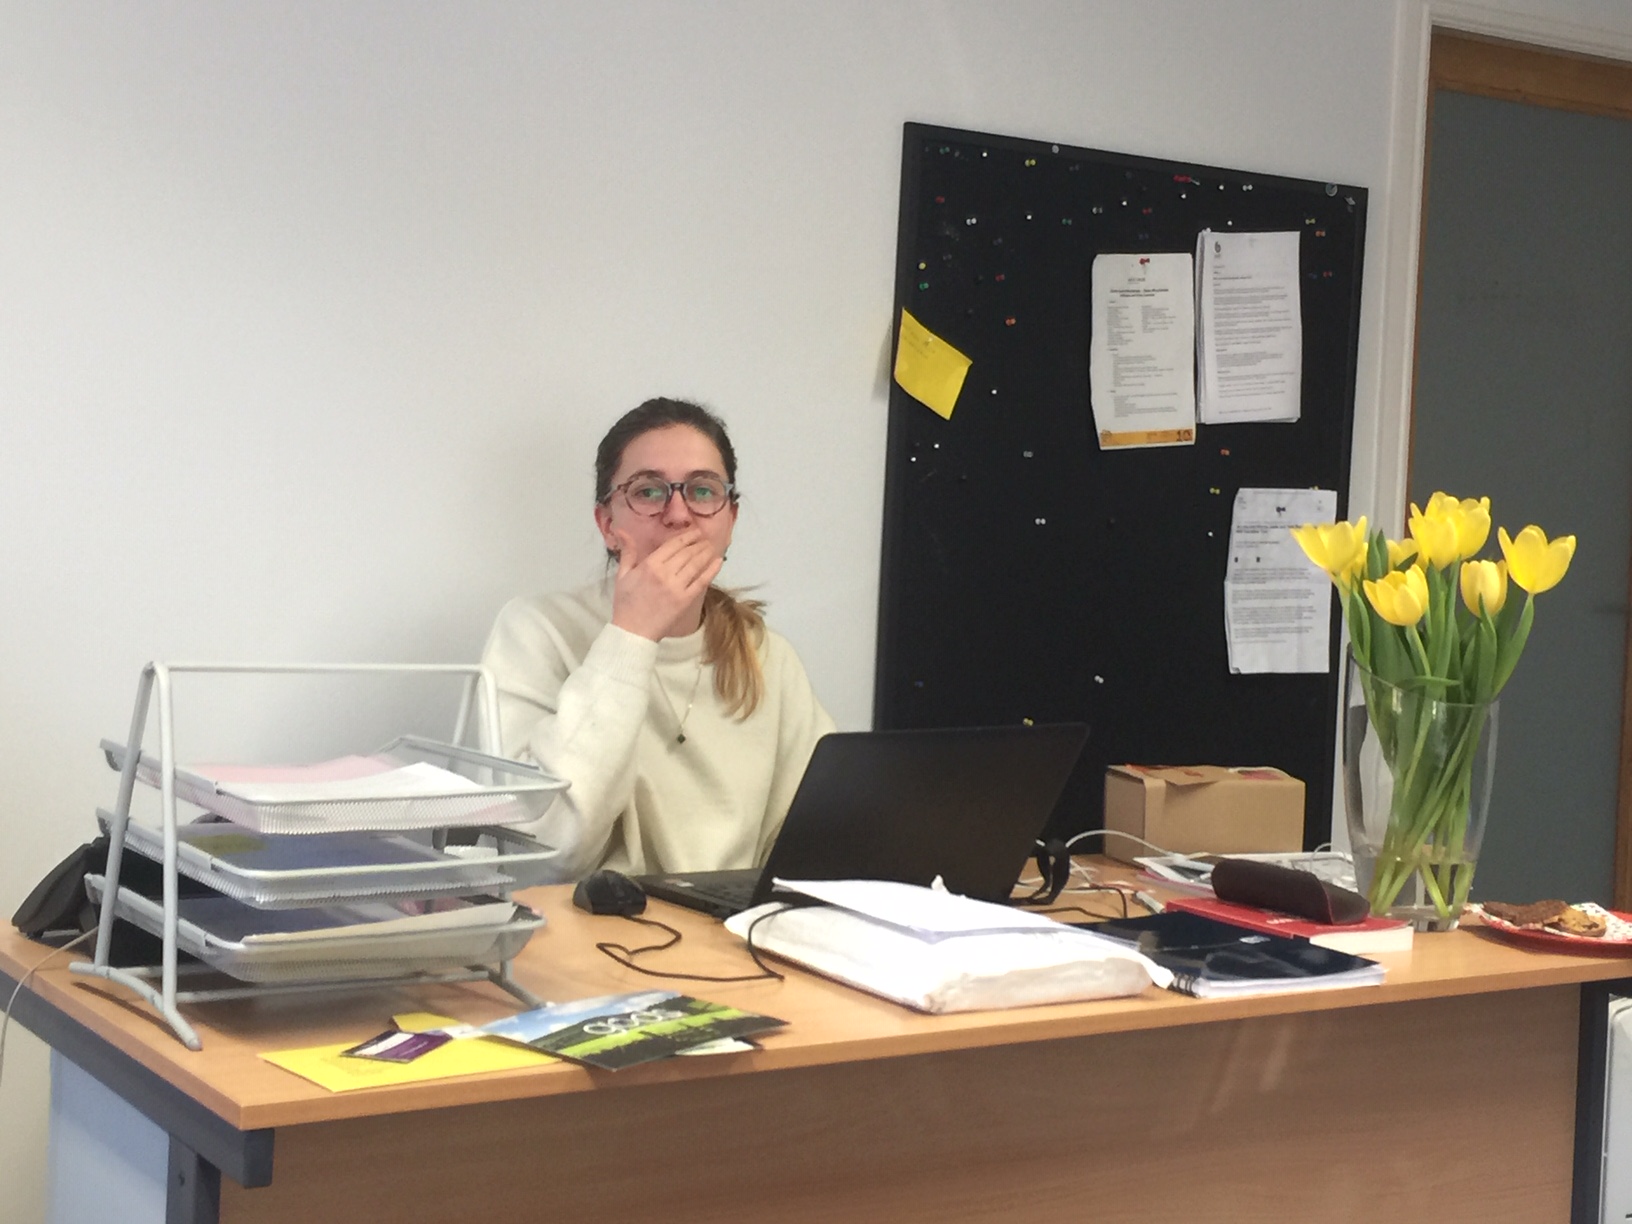 Lovely to see Marta from Quality Bearings Online in the office